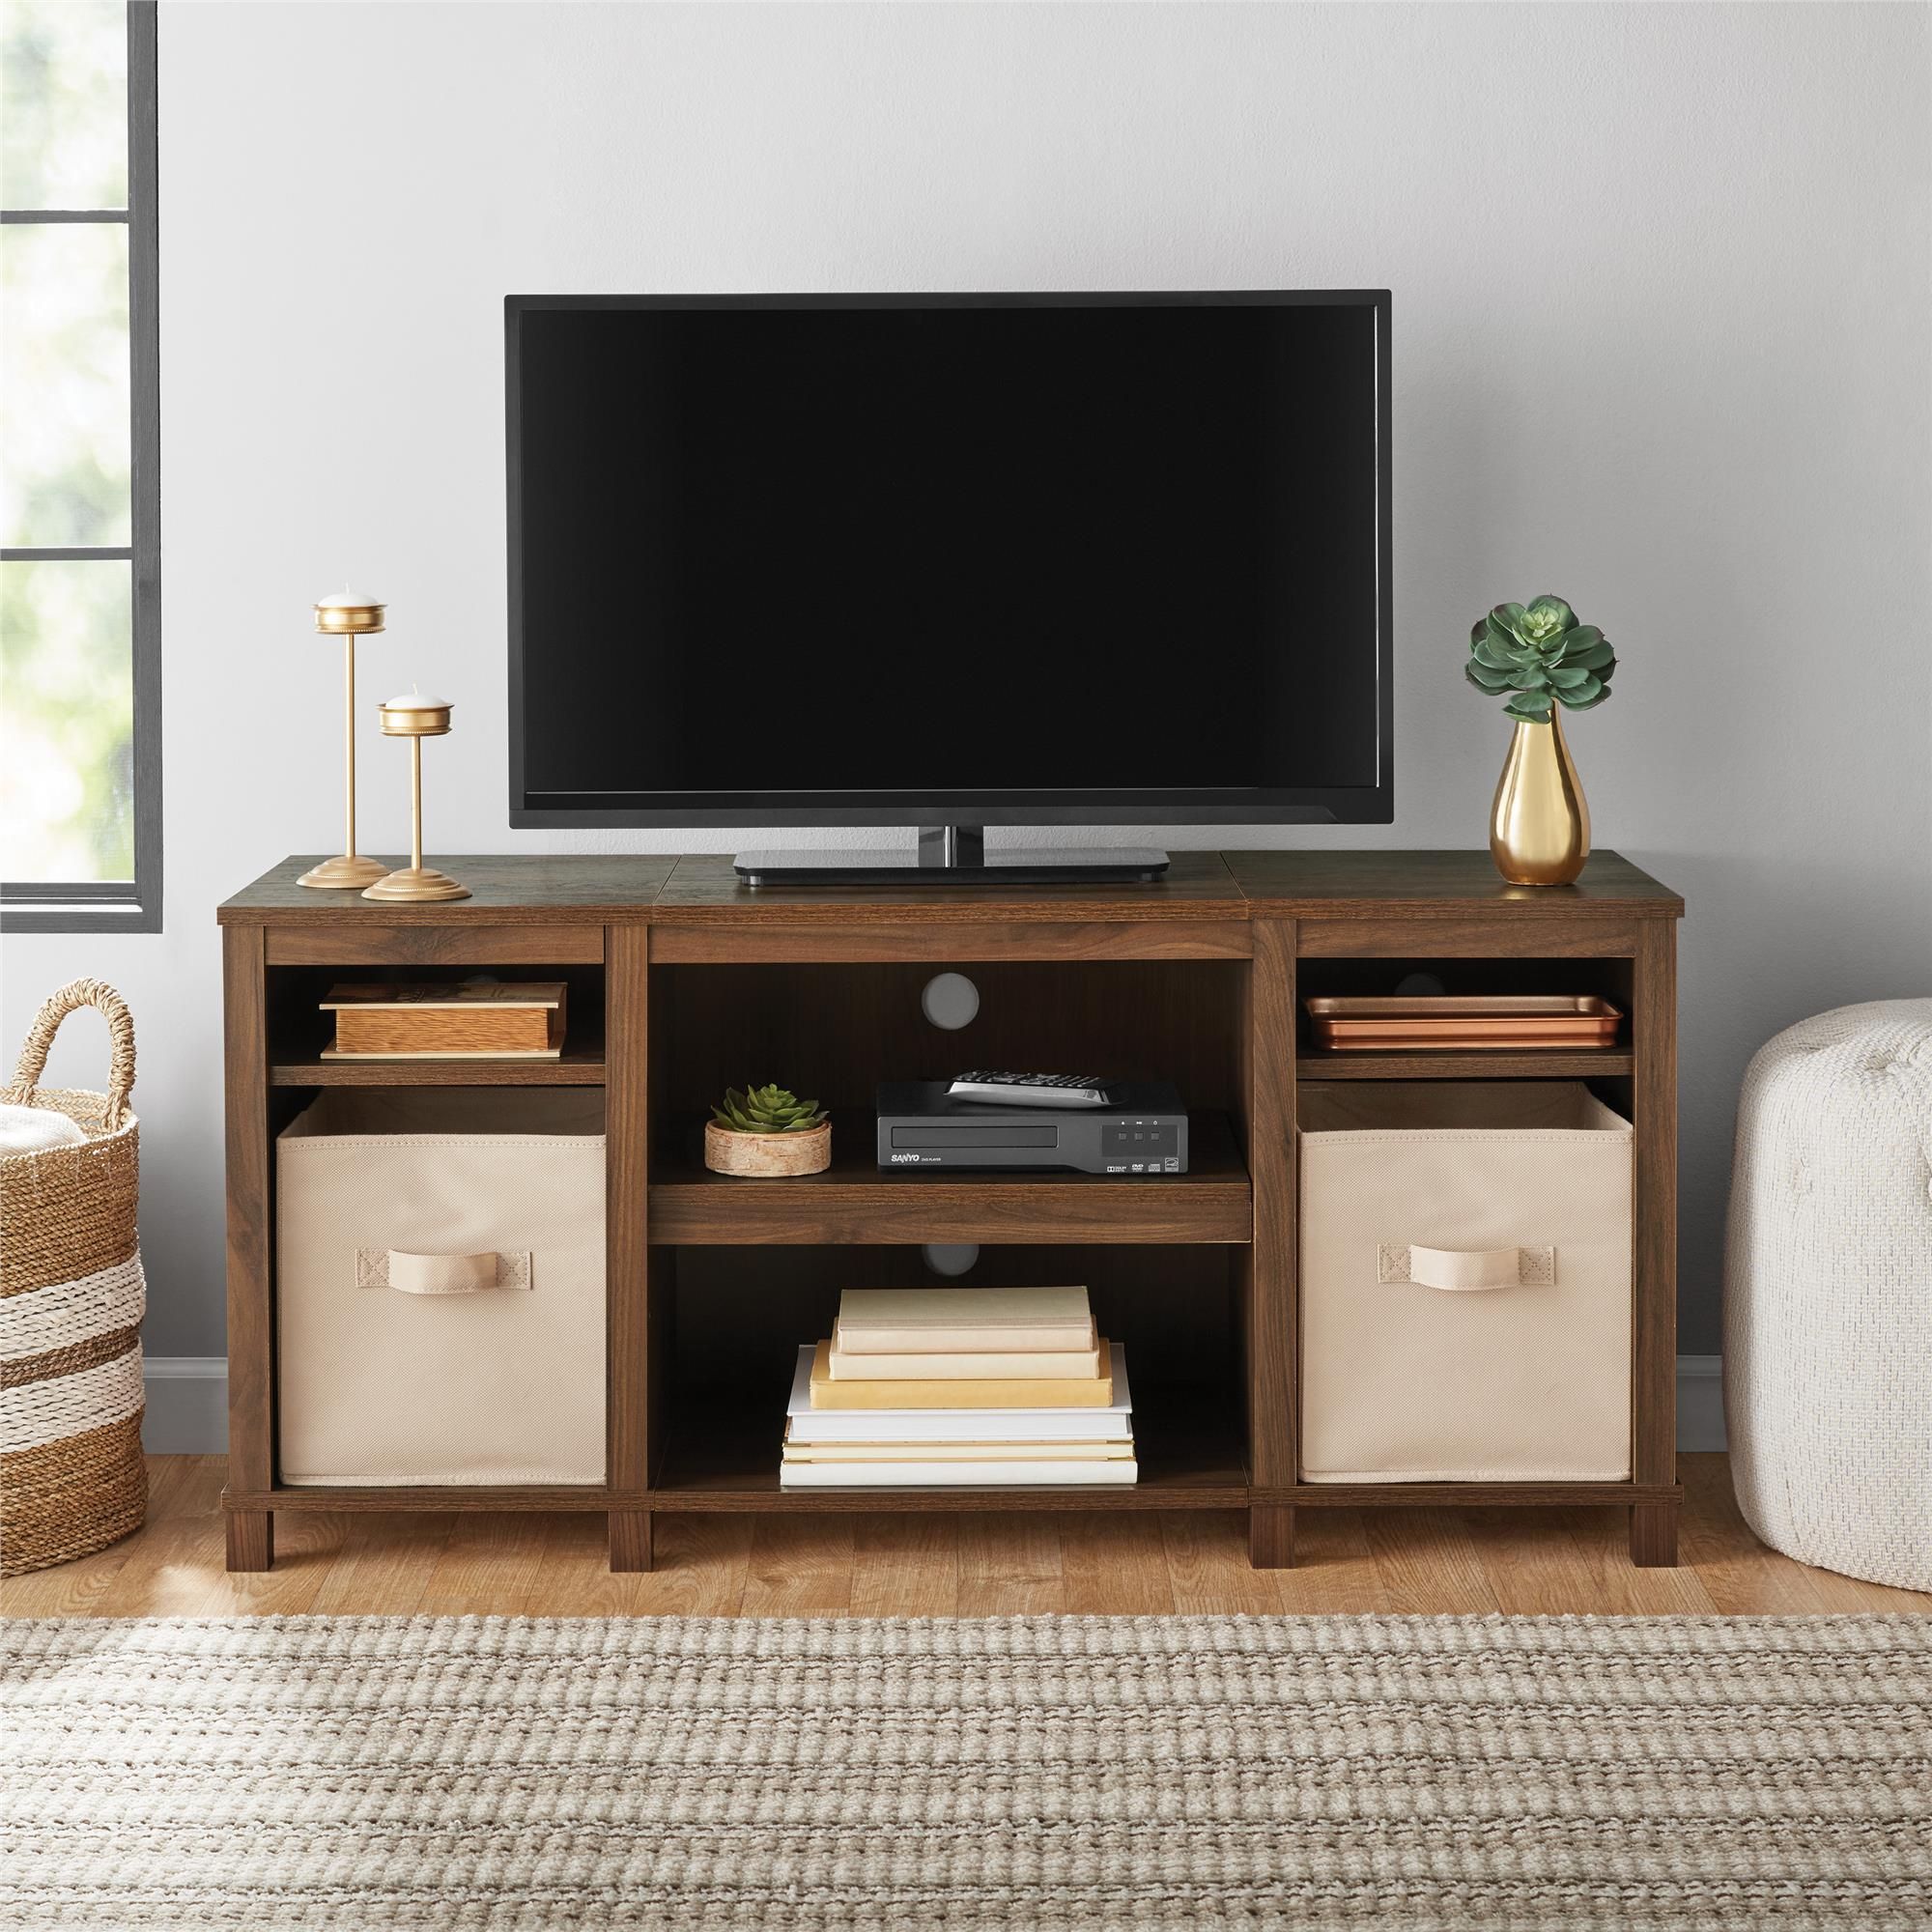 Mainstays Parsons Cubby Tv Stand For Tvs Up To 50", Walnut With Regard To Tv Stands For Tvs Up To 50" (View 3 of 15)